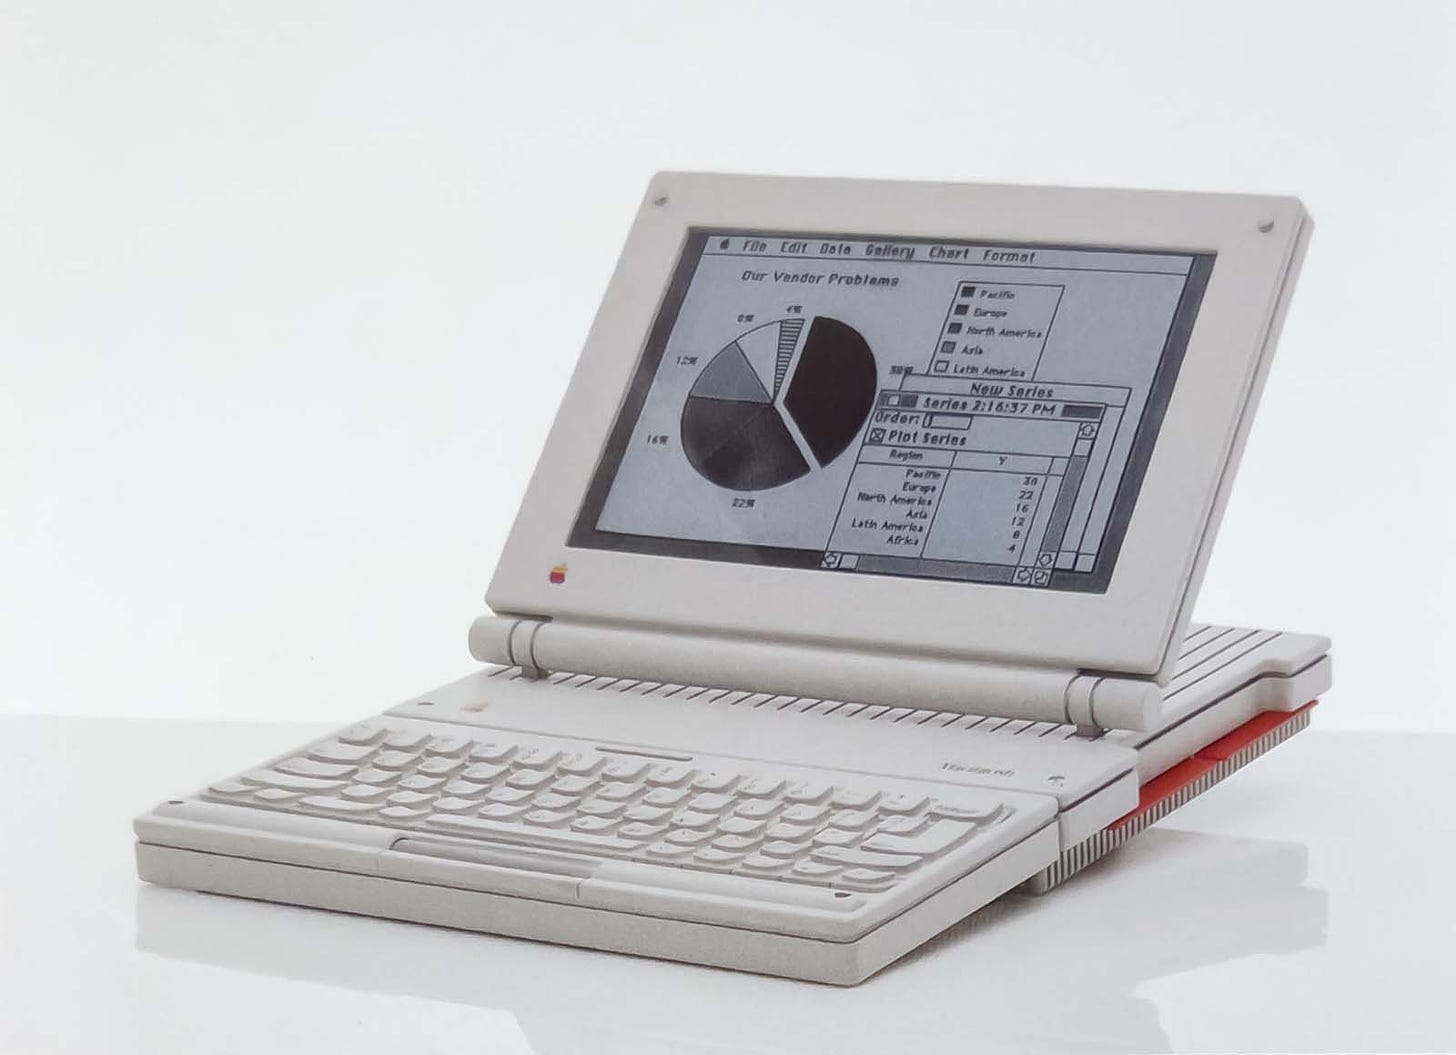 A prototype design for a portable Mac, with folding LCD screen and bright red accent